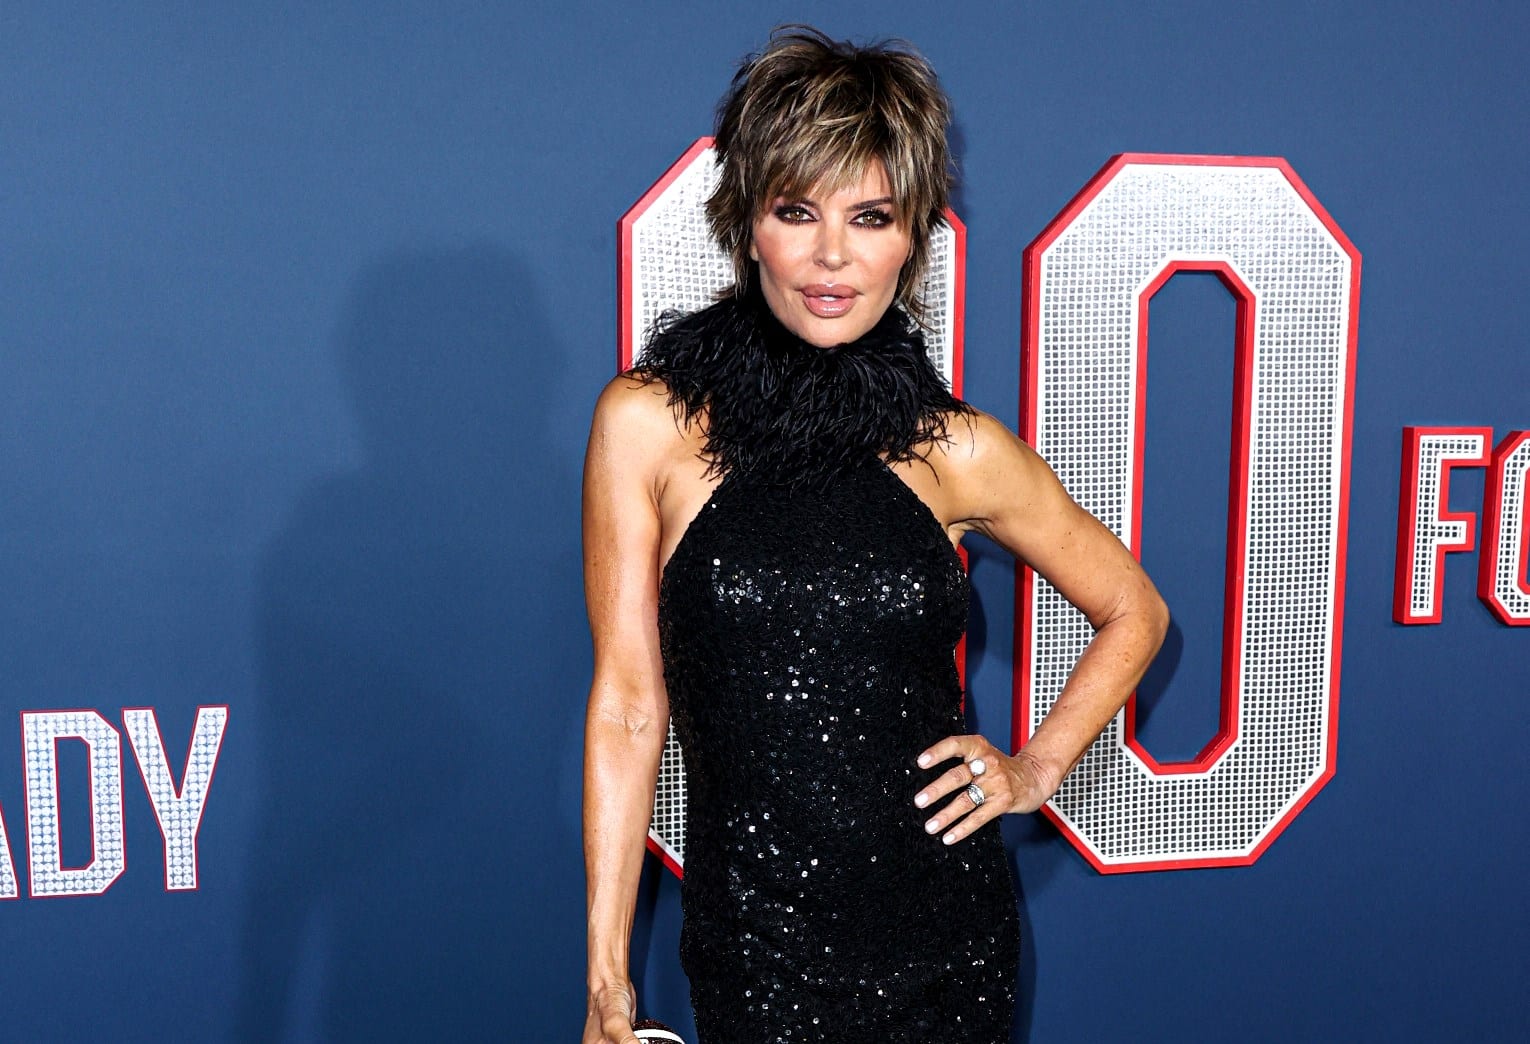 Lisa Rinna on What She'll Miss of RHOBH, What the Show Will Lack Without Her, and Having No Regrets About Kathy Drama, Plus Shades RHOP and Talks Wine